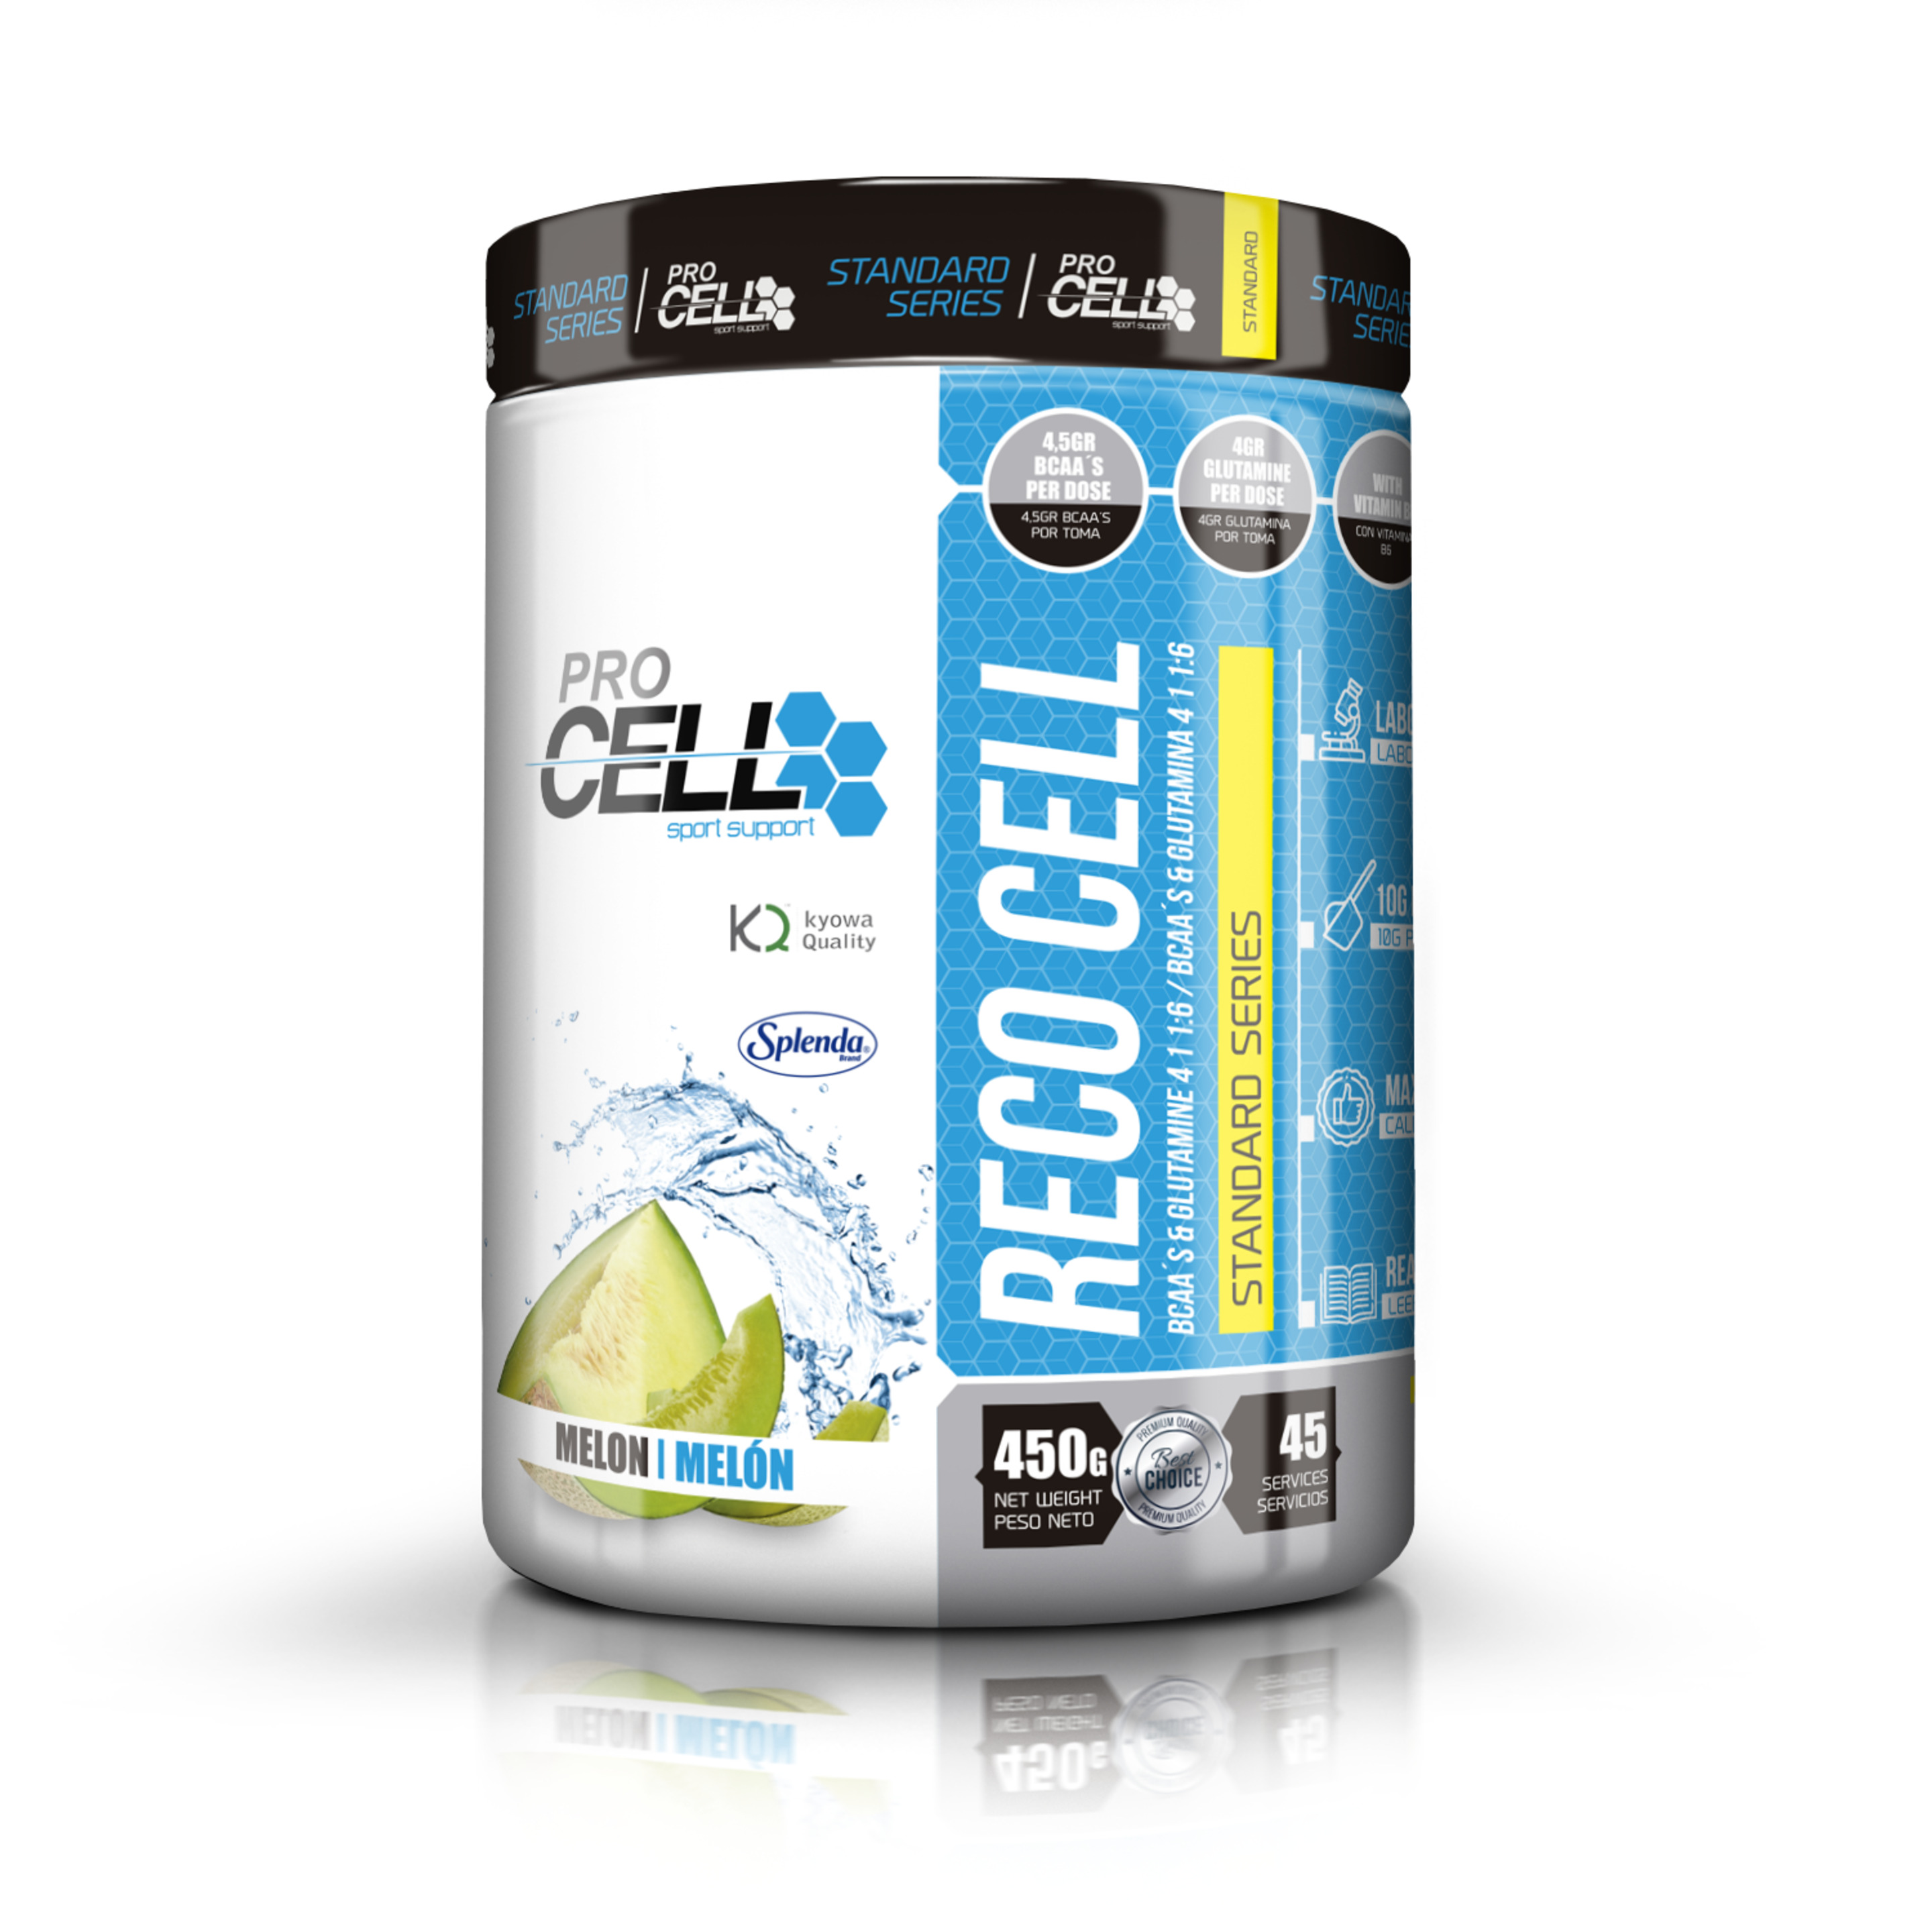 Reco Procell 300 Gr -  - 